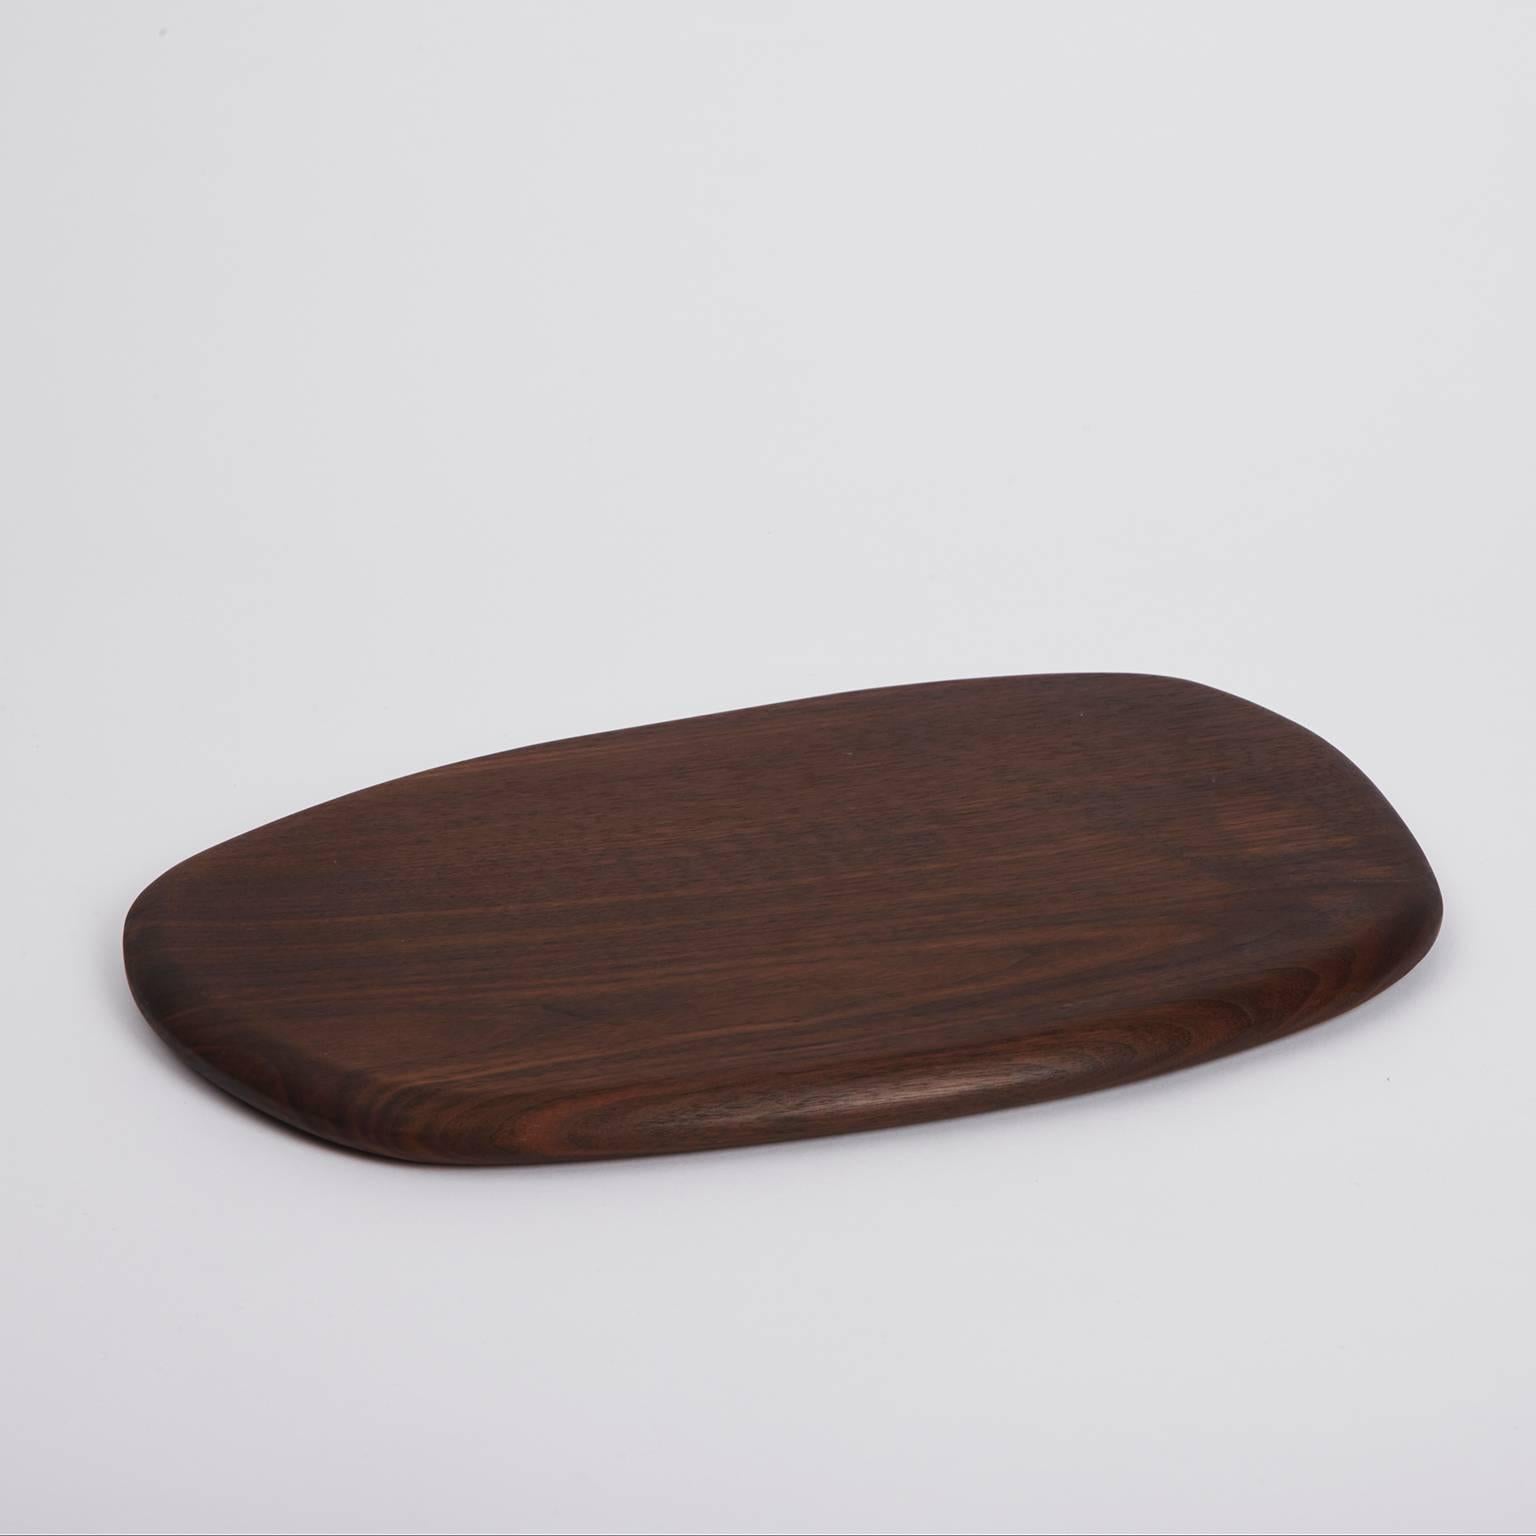 Handcrafted in Brooklyn, Noah Spencer carefully selects wood with beautiful grain patterns to create each Pebble Cutting Board. These sculptural and functional objects are great for simple kitchen cutting and artful food presentation. 

Materials: